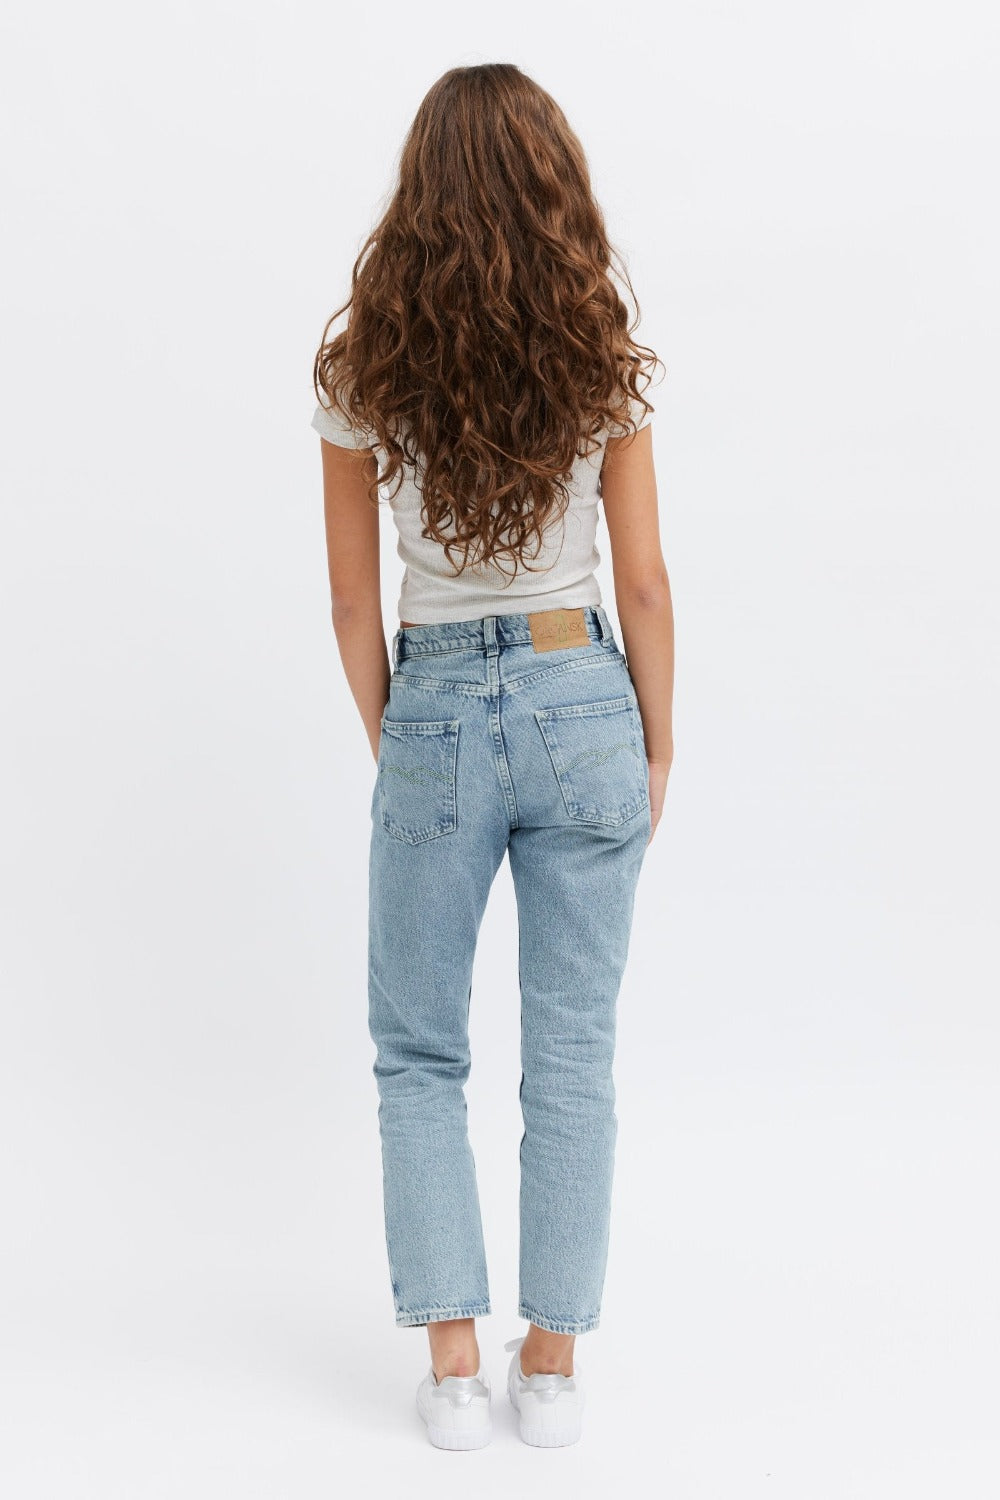 Cropped jeans - Circular Fashion - Lease, rent or buy jeans and recycle